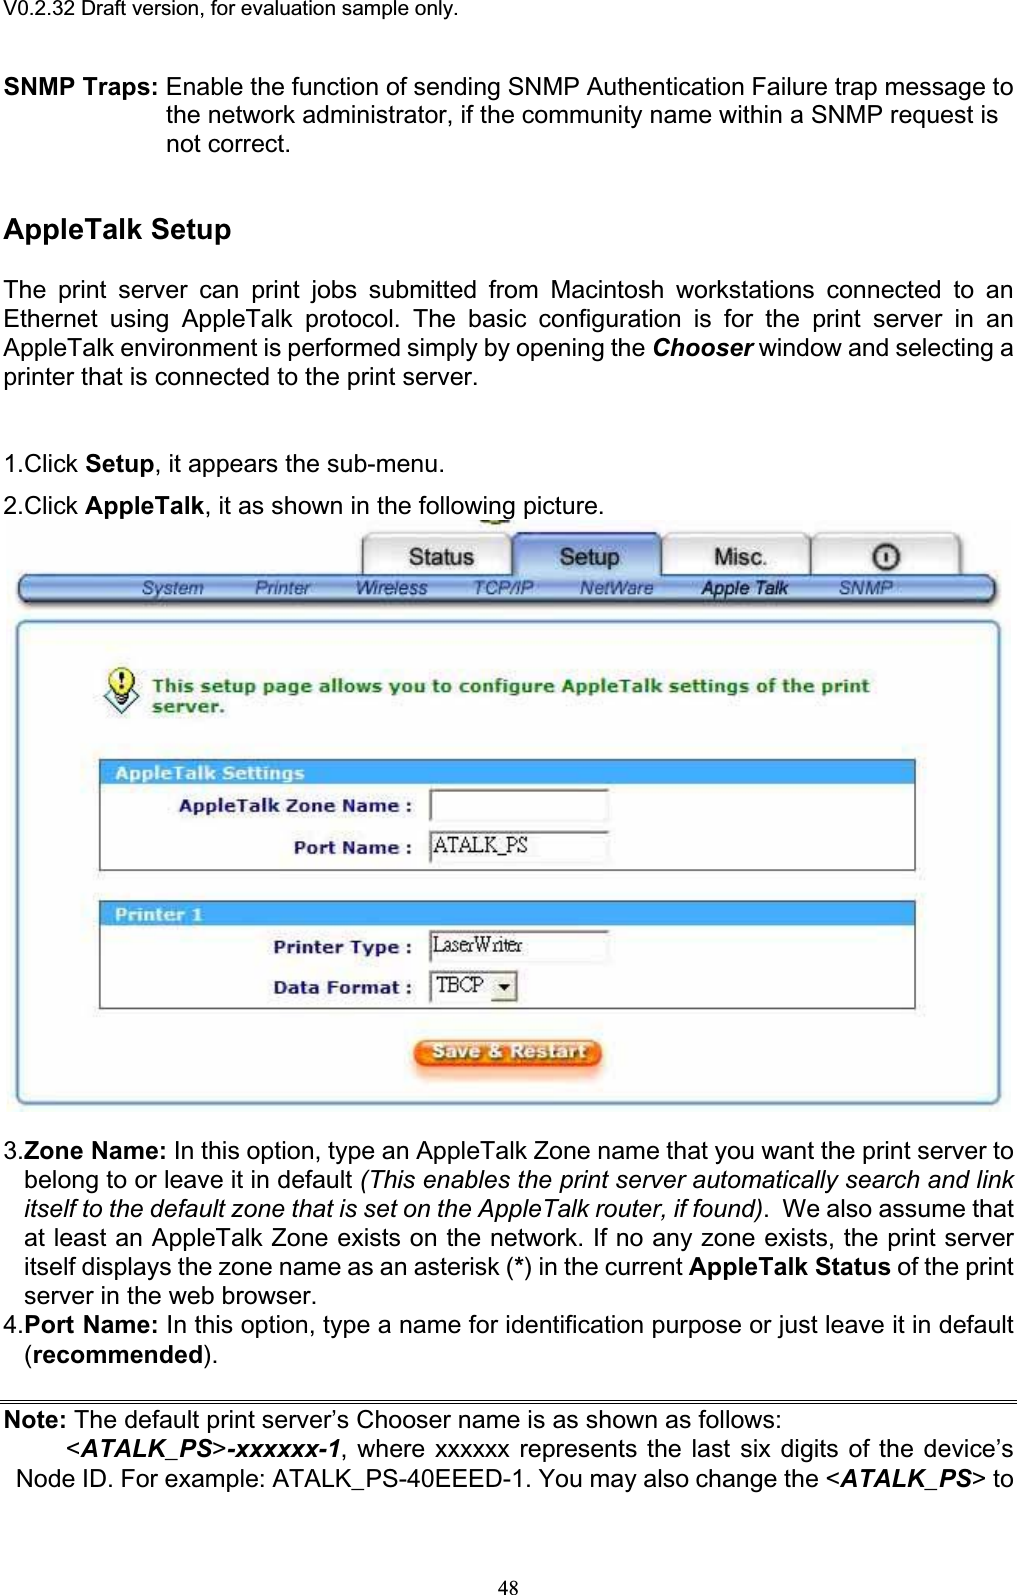 V0.2.32 Draft version, for evaluation sample only.SNMP Traps: Enable the function of sending SNMP Authentication Failure trap message tothe network administrator, if the community name within a SNMP request is not correct. AppleTalk Setup The print server can print jobs submitted from Macintosh workstations connected to an Ethernet using AppleTalk protocol. The basic configuration is for the print server in an AppleTalk environment is performed simply by opening the Chooser window and selecting a printer that is connected to the print server. 1.Click Setup, it appears the sub-menu. 2.Click AppleTalk, it as shown in the following picture. 3.Zone Name: In this option, type an AppleTalk Zone name that you want the print server to belong to or leave it in default (This enables the print server automatically search and link itself to the default zone that is set on the AppleTalk router, if found).  We also assume that at least an AppleTalk Zone exists on the network. If no any zone exists, the print server itself displays the zone name as an asterisk (*) in the current AppleTalk Status of the print server in the web browser. 4.Port Name: In this option, type a name for identification purpose or just leave it in default (recommended).Note: The default print server’s Chooser name is as shown as follows:&lt;ATALK_PS&gt;-xxxxxx-1, where xxxxxx represents the last six digits of the device’s Node ID. For example: ATALK_PS-40EEED-1. You may also change the &lt;ATALK_PS&gt; to 48